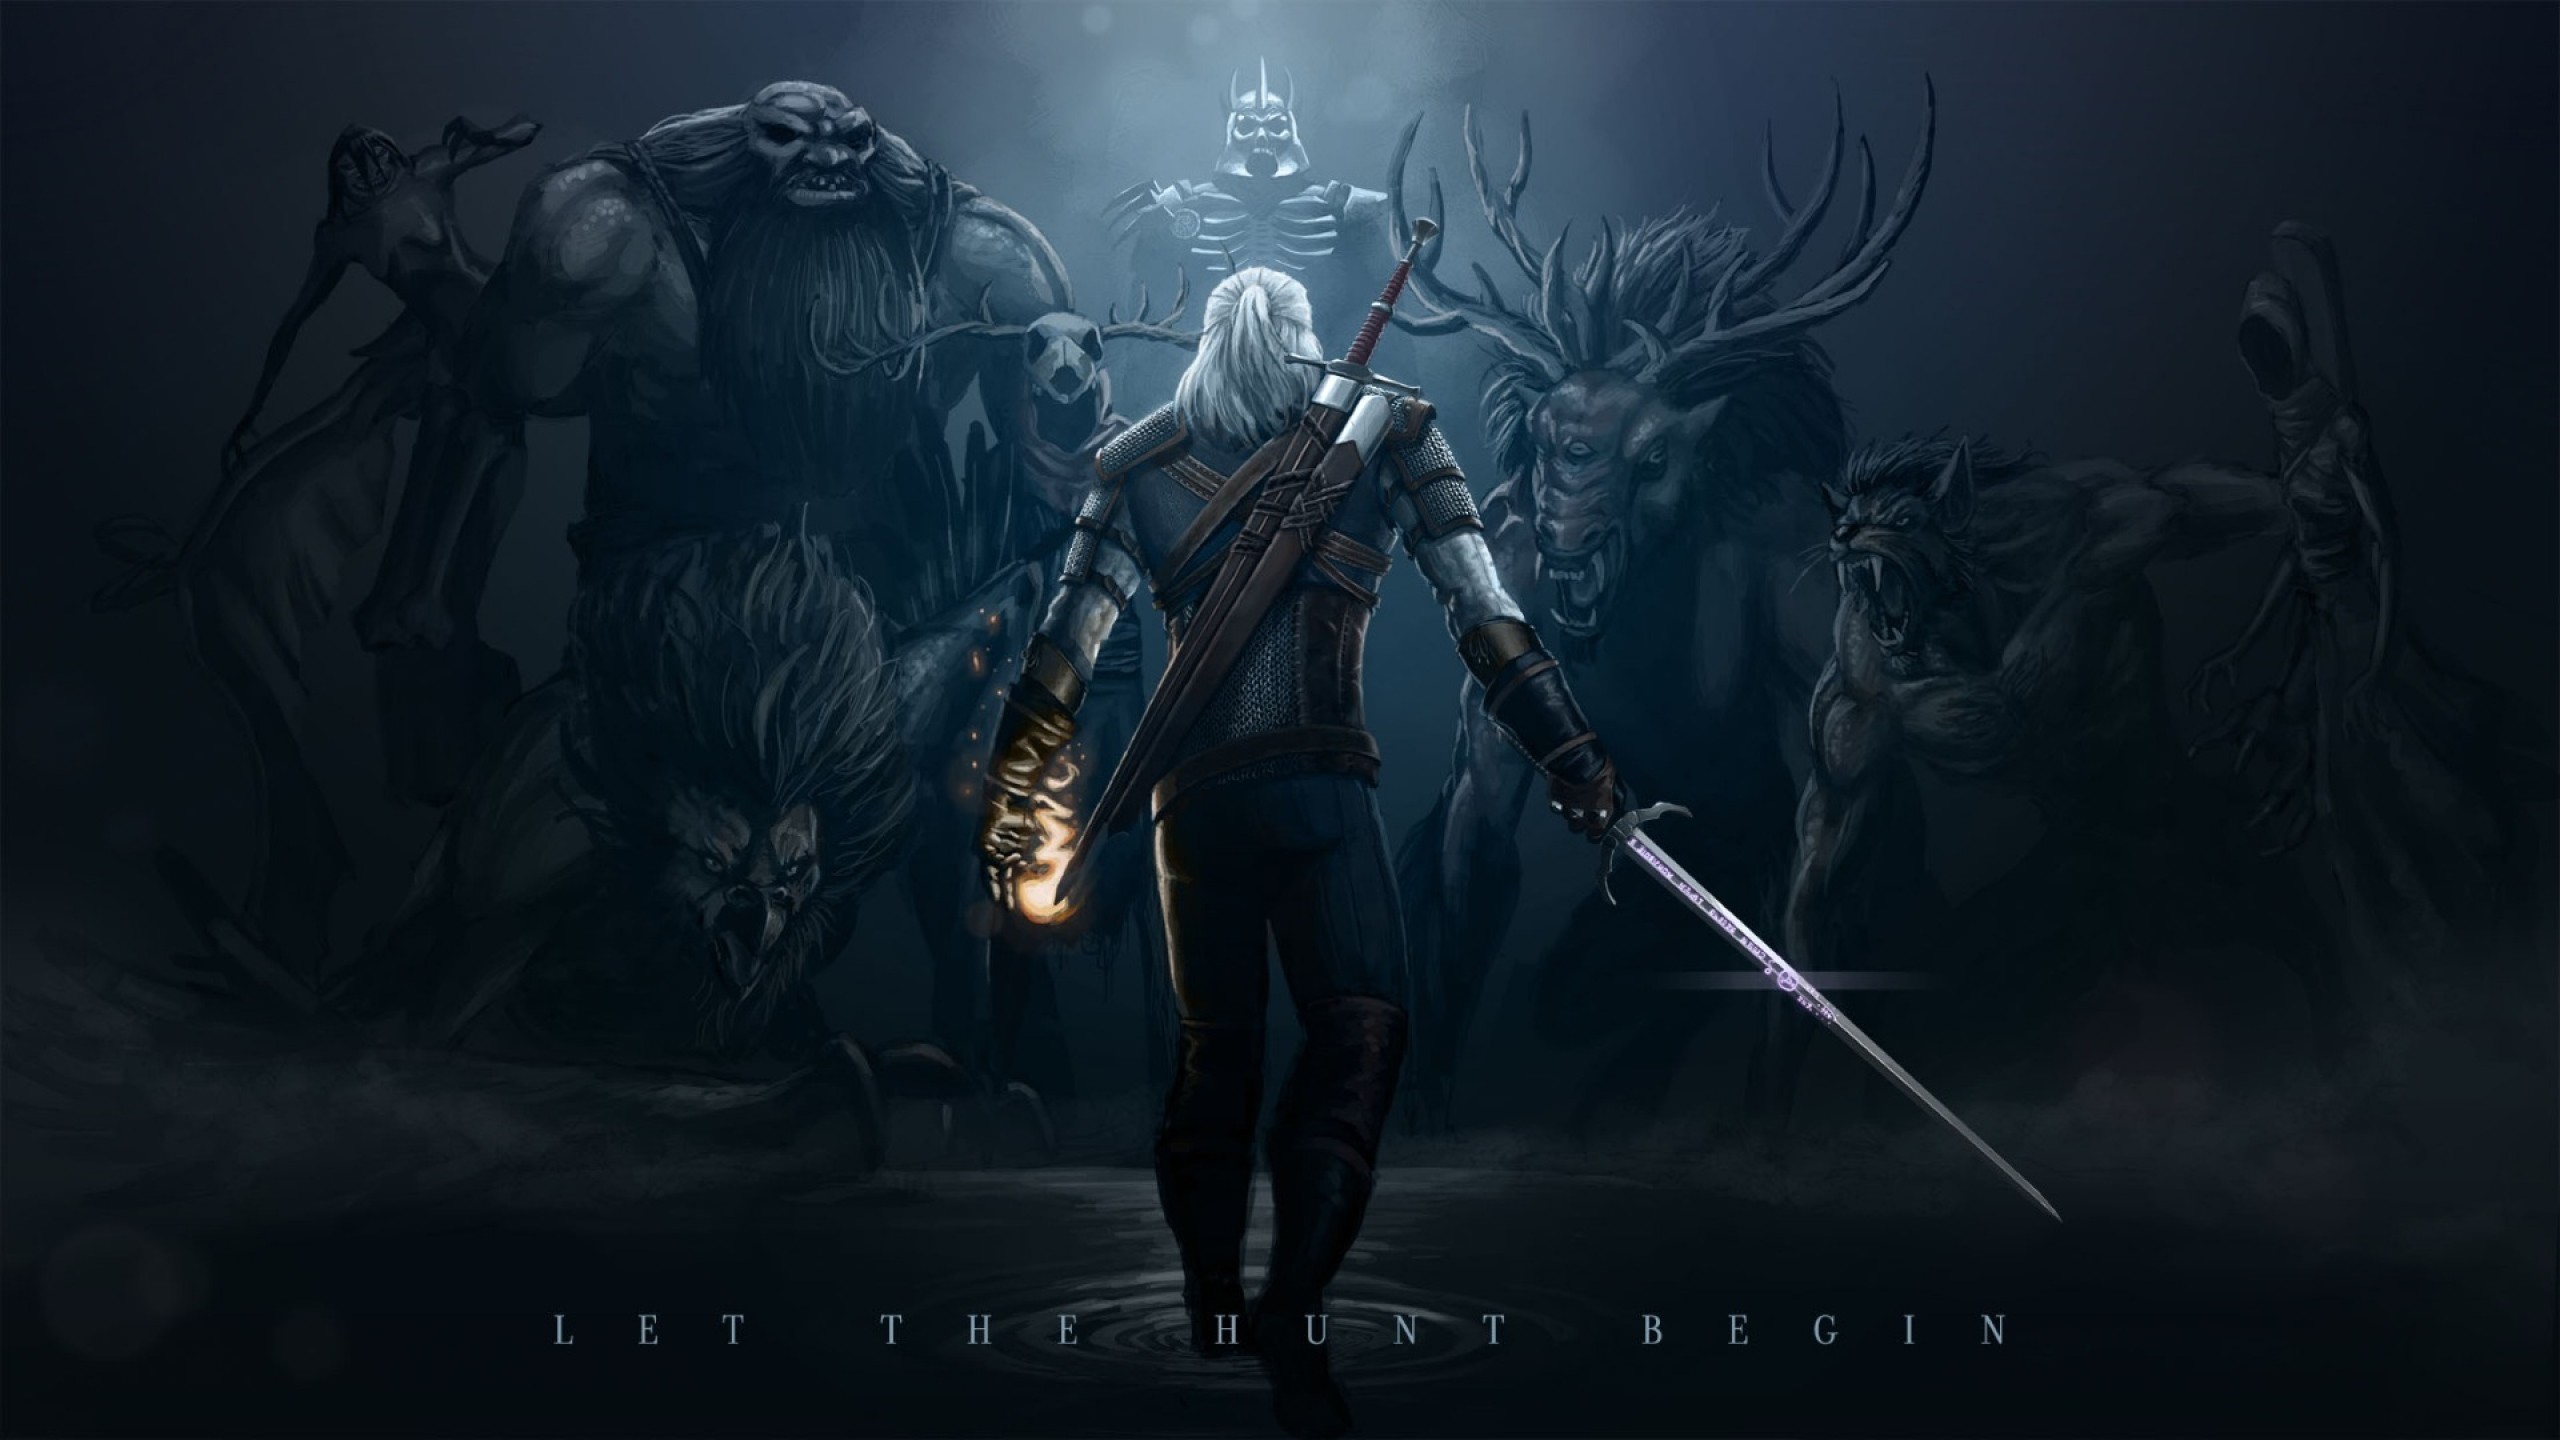 Witcher 3 Wallpaper 2560x1440 76 Images